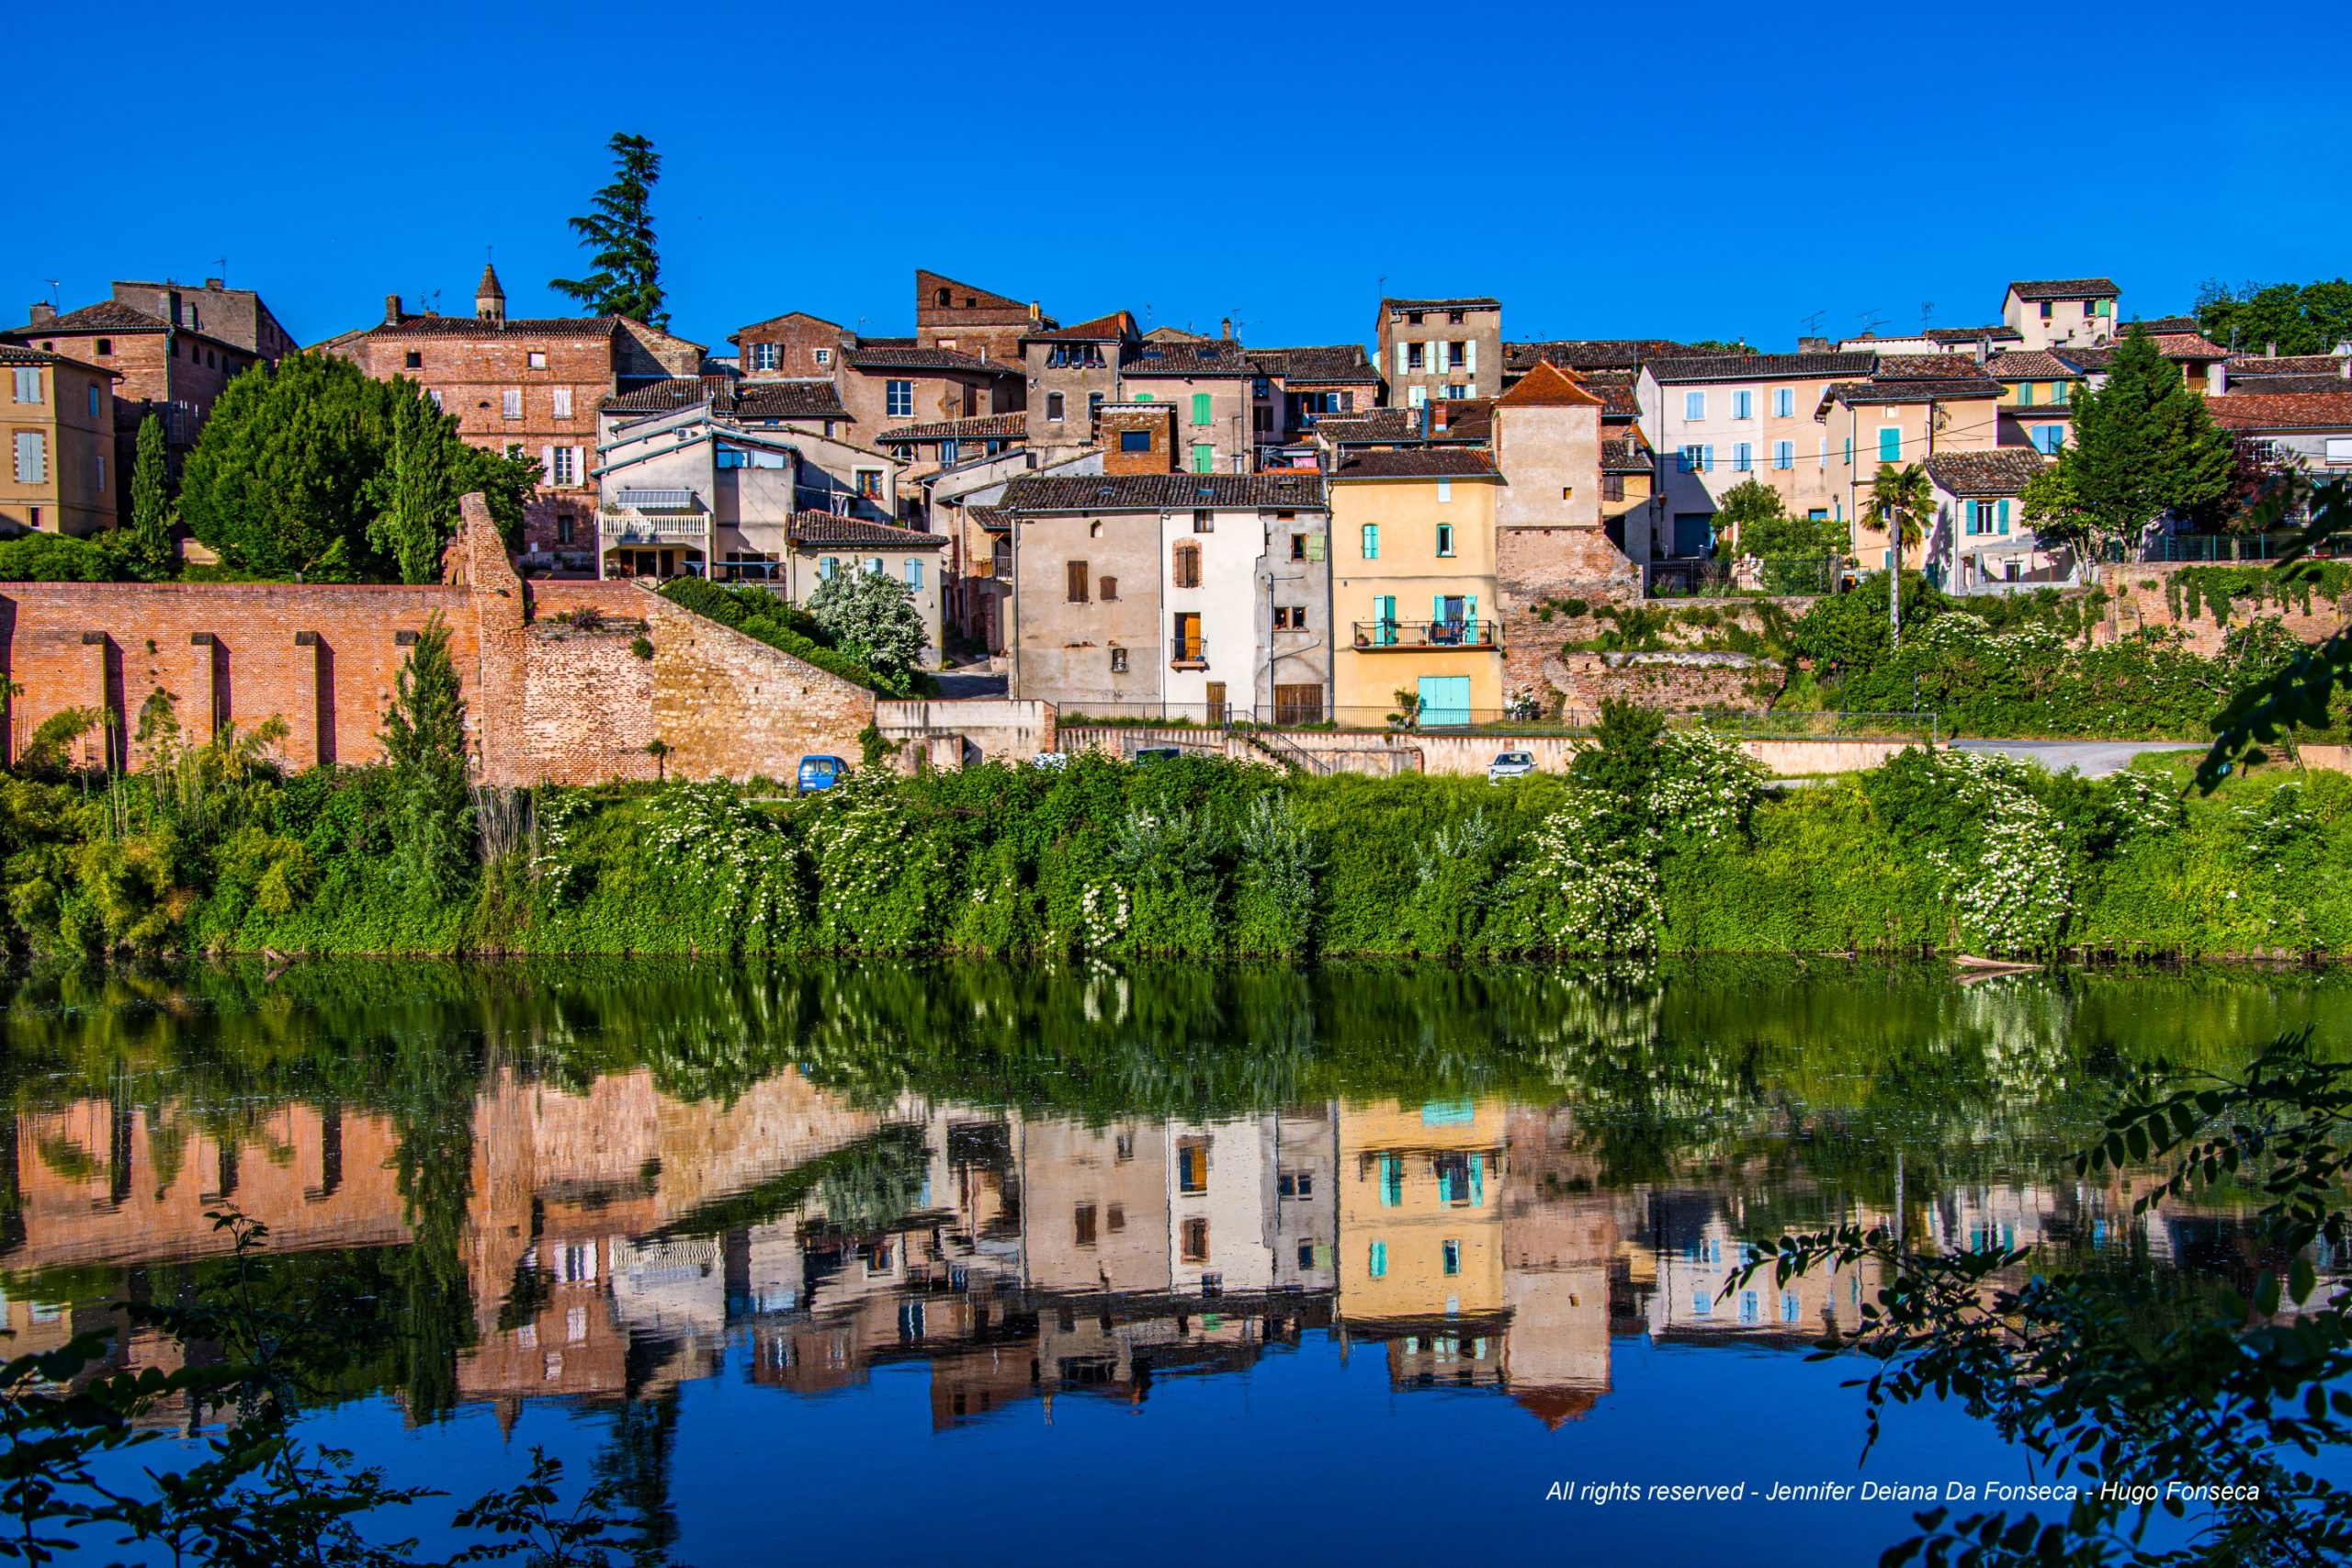 Reflection on the Gaillac river